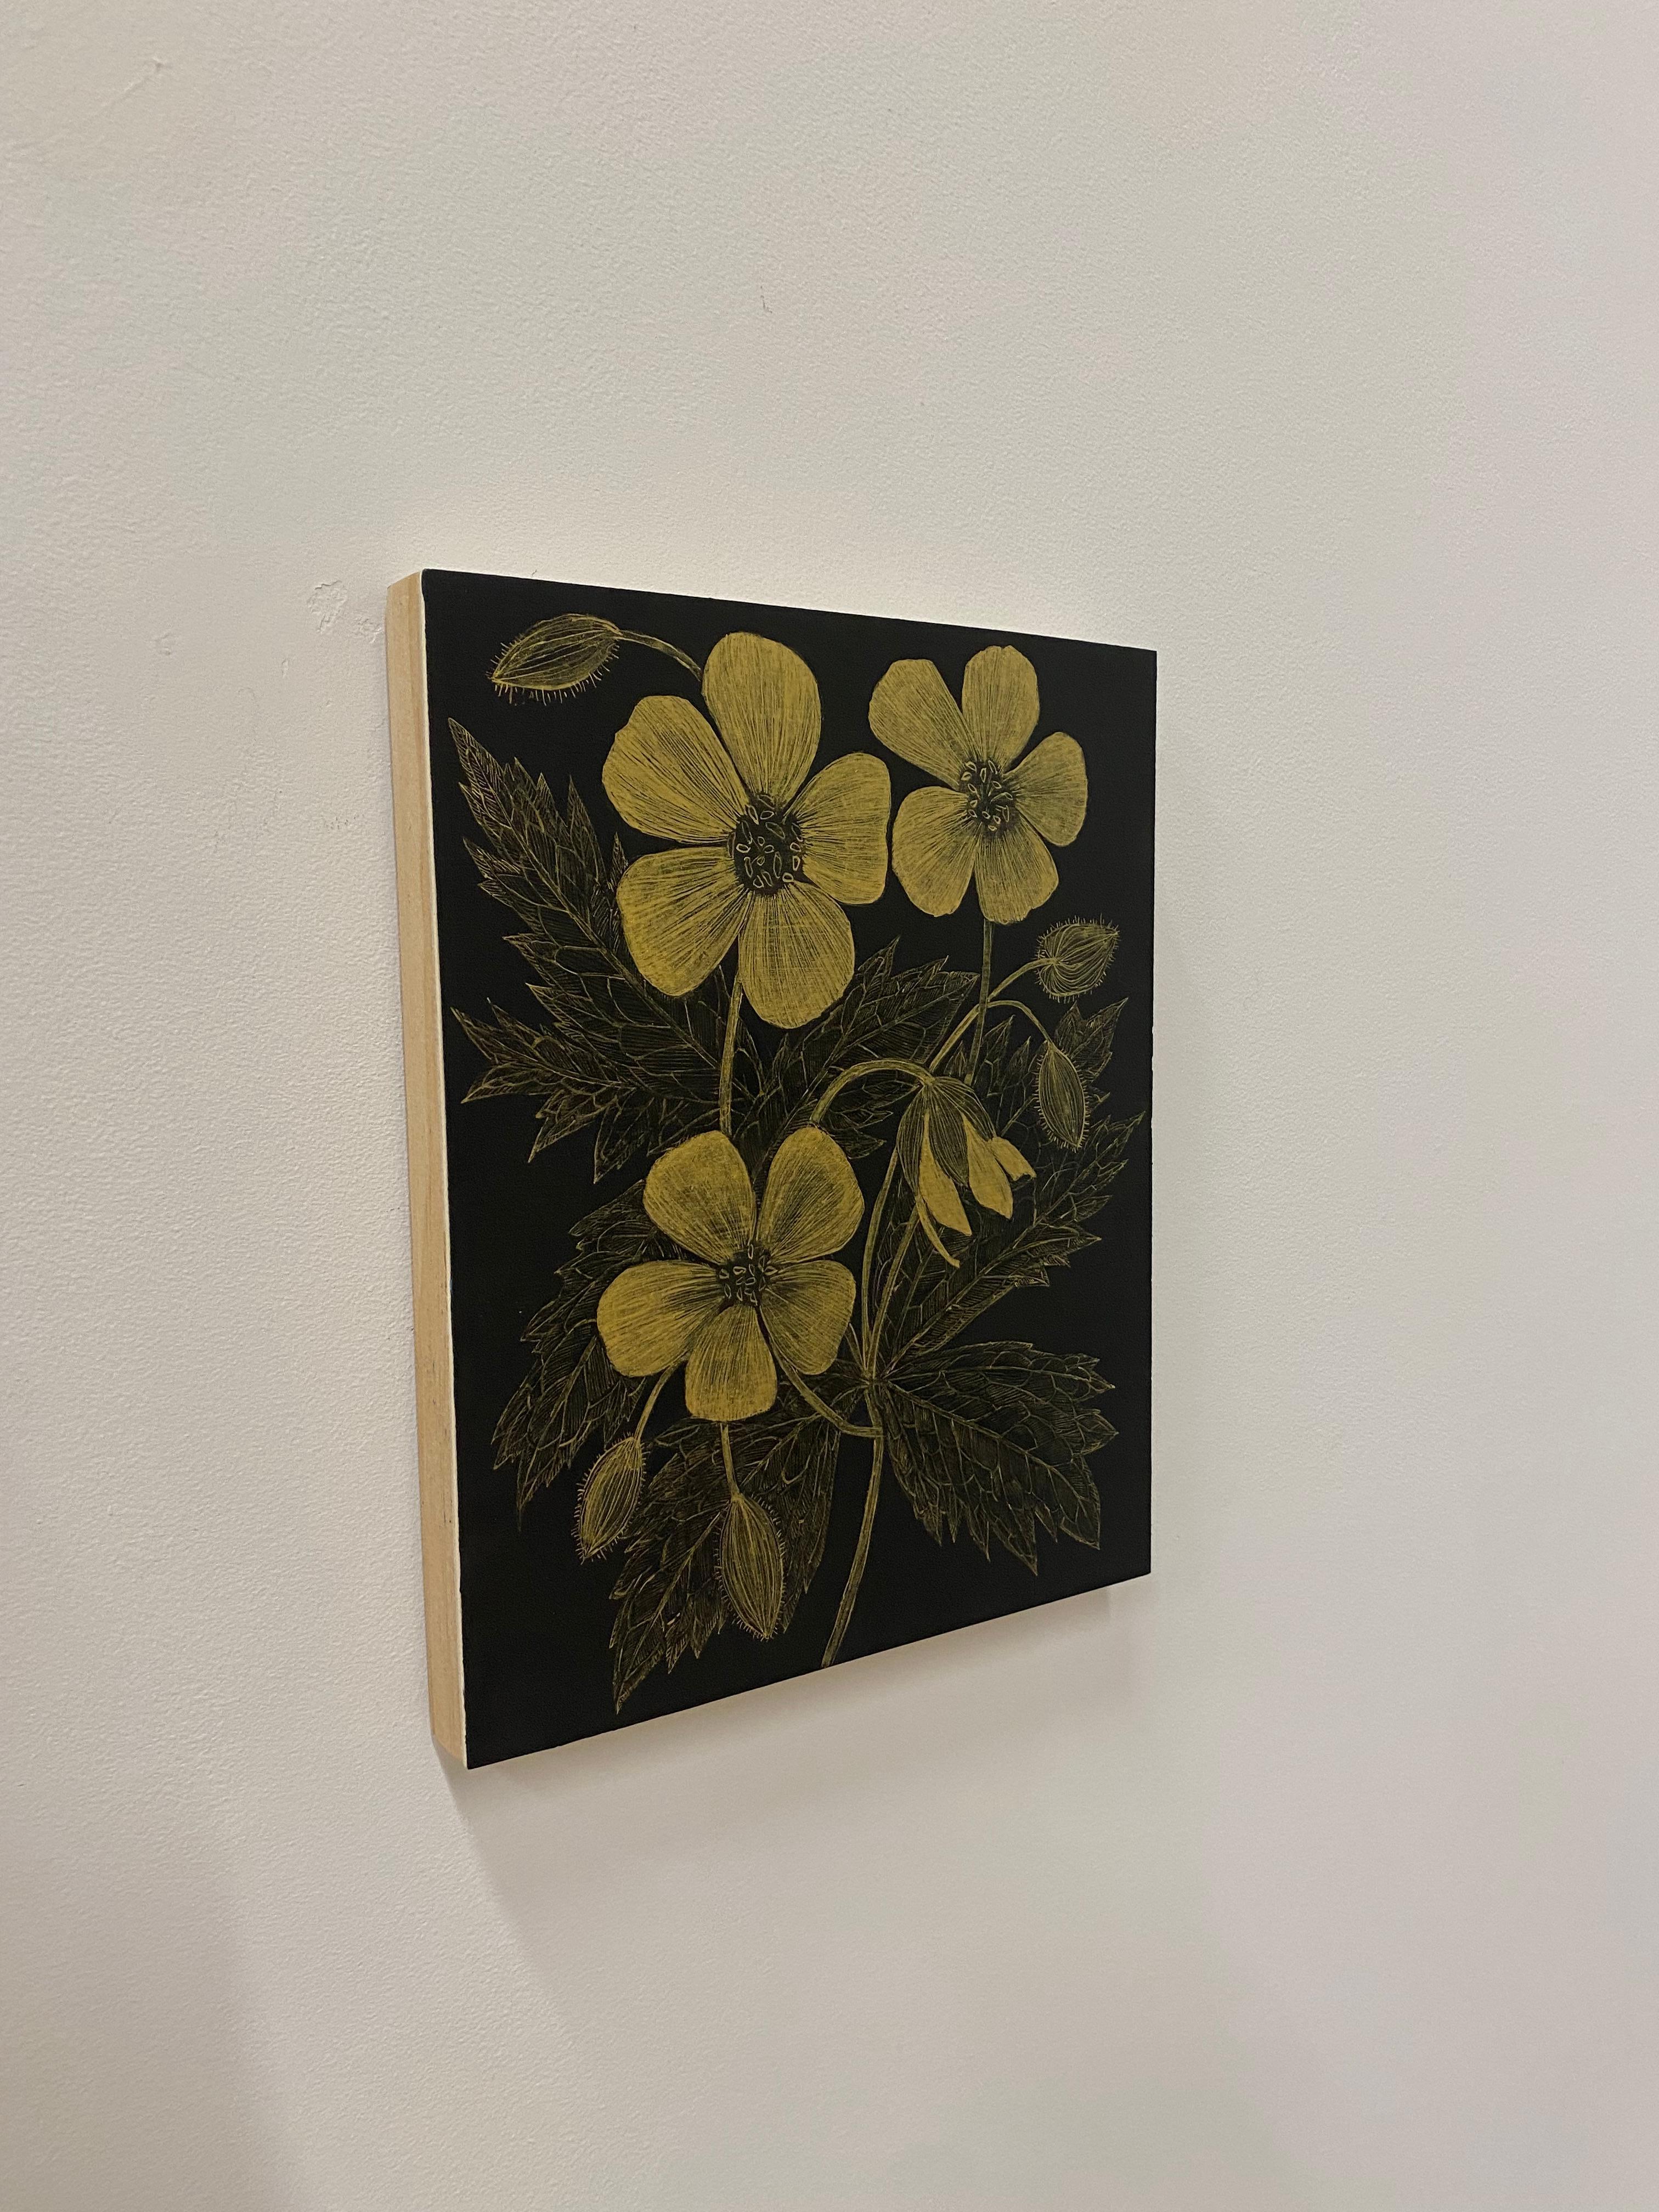 Wild Geranium Two, Botanical Painting Black Panel, Gold Flowers, Leaves, Stem For Sale 6